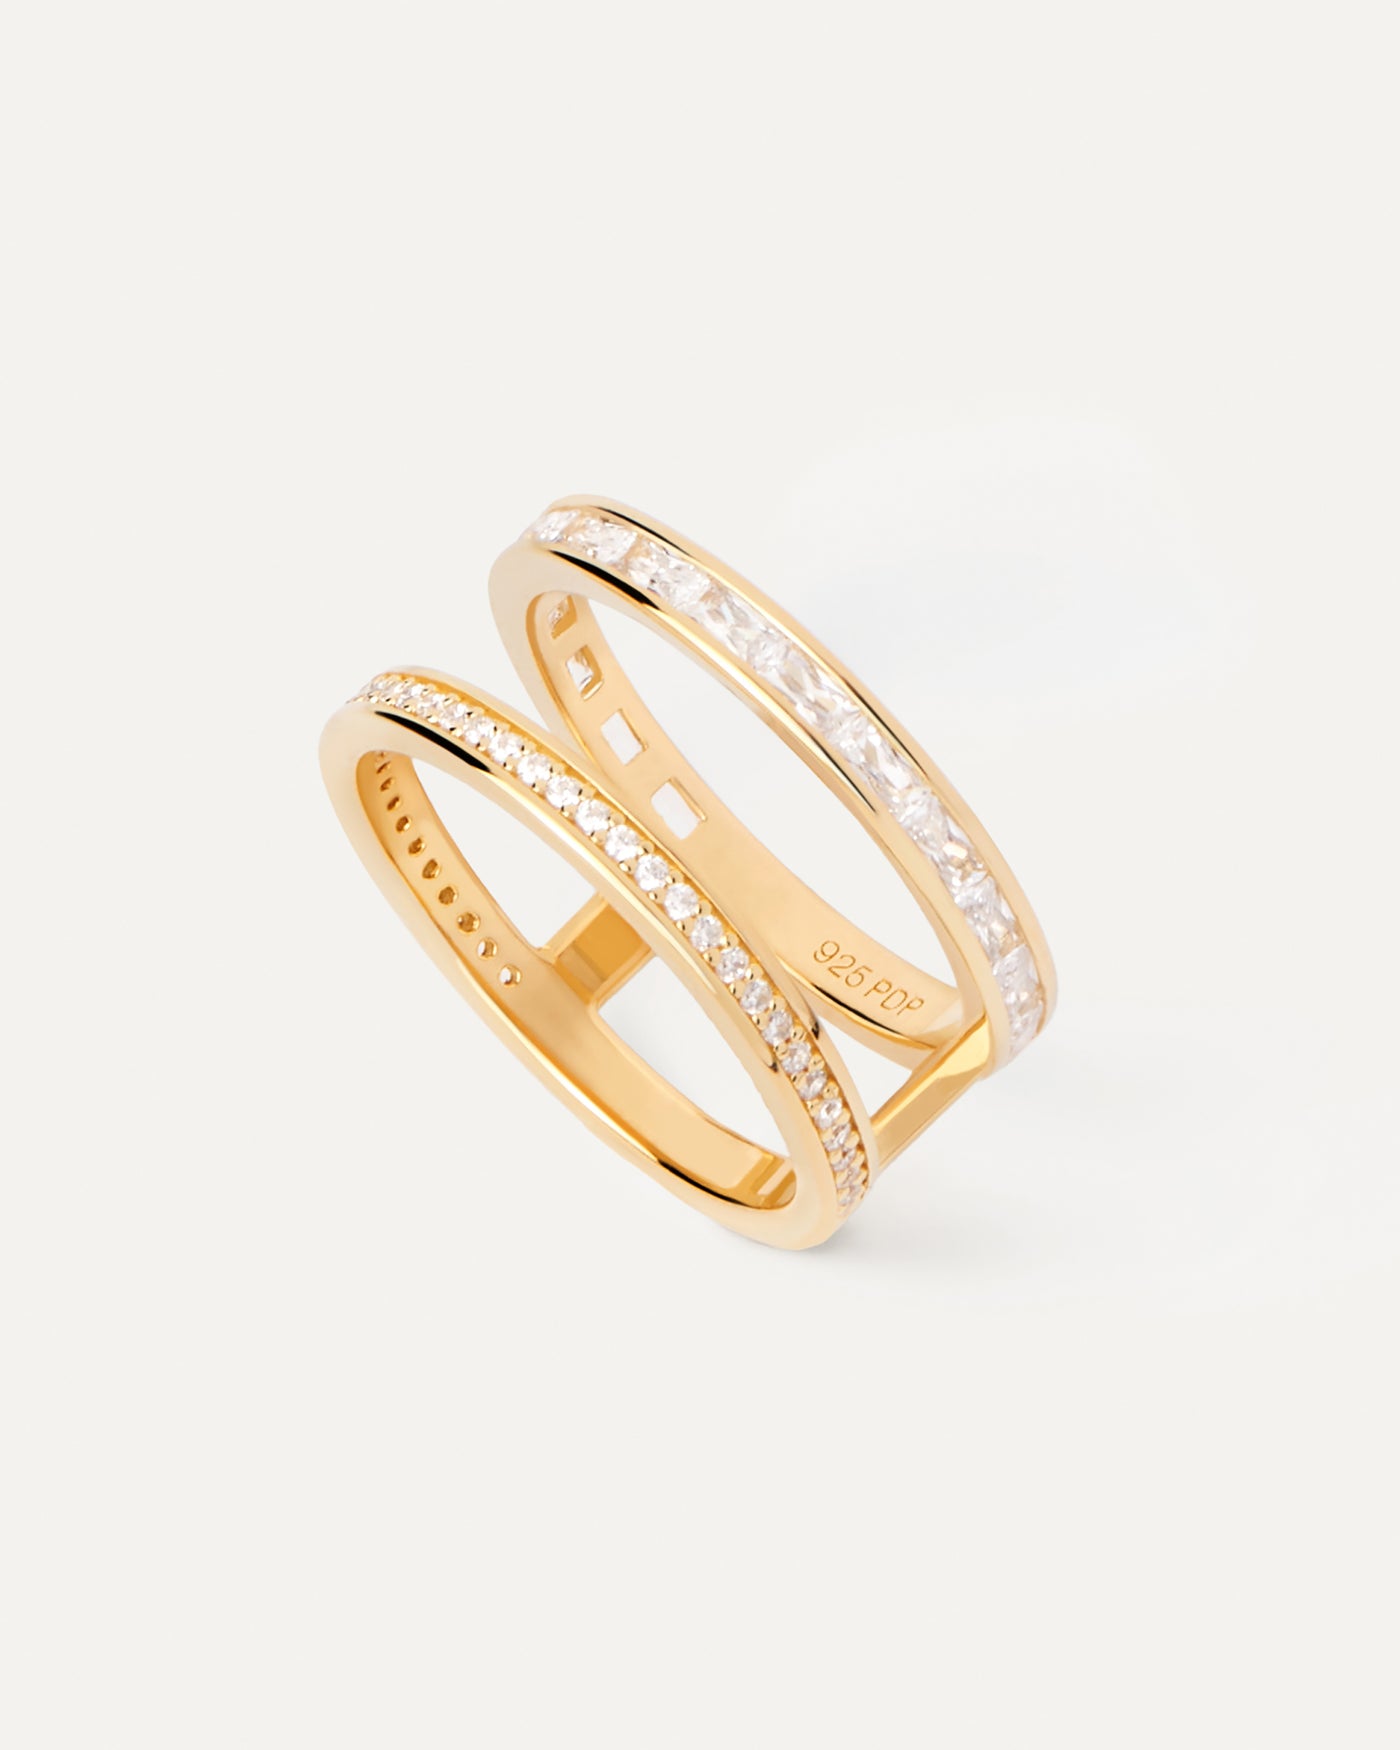 2023 Selection | Bianca Ring. Gold-plated double band ring set with white zirconia. Get the latest arrival from PDPAOLA. Place your order safely and get this Best Seller. Free Shipping.